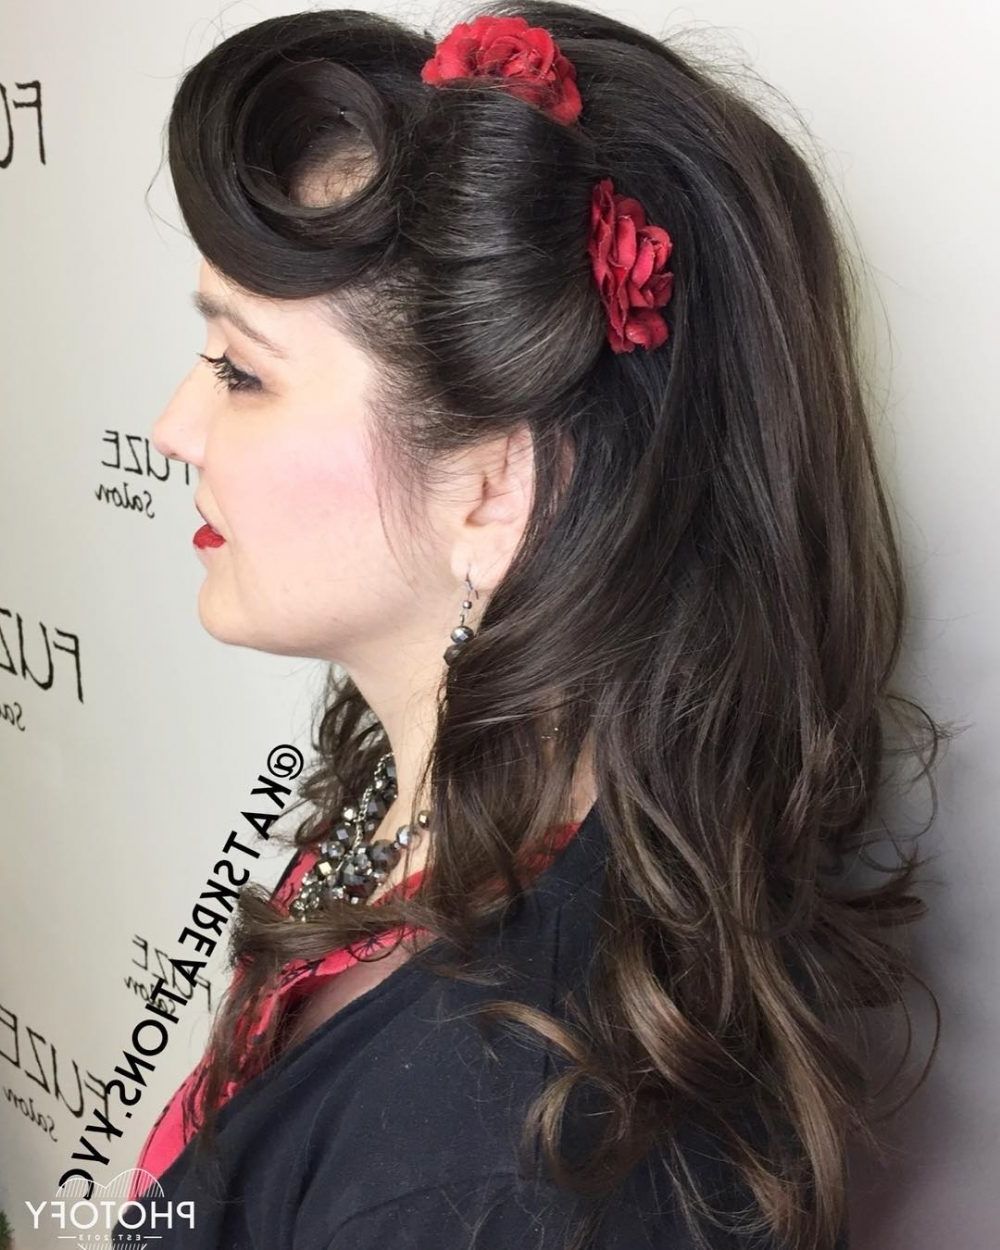 42 Pin Up Hairstyles That Scream "retro Chic" (tutorials Included) Pertaining To Recent Casual And Classic Blonde Hairstyles (View 19 of 20)